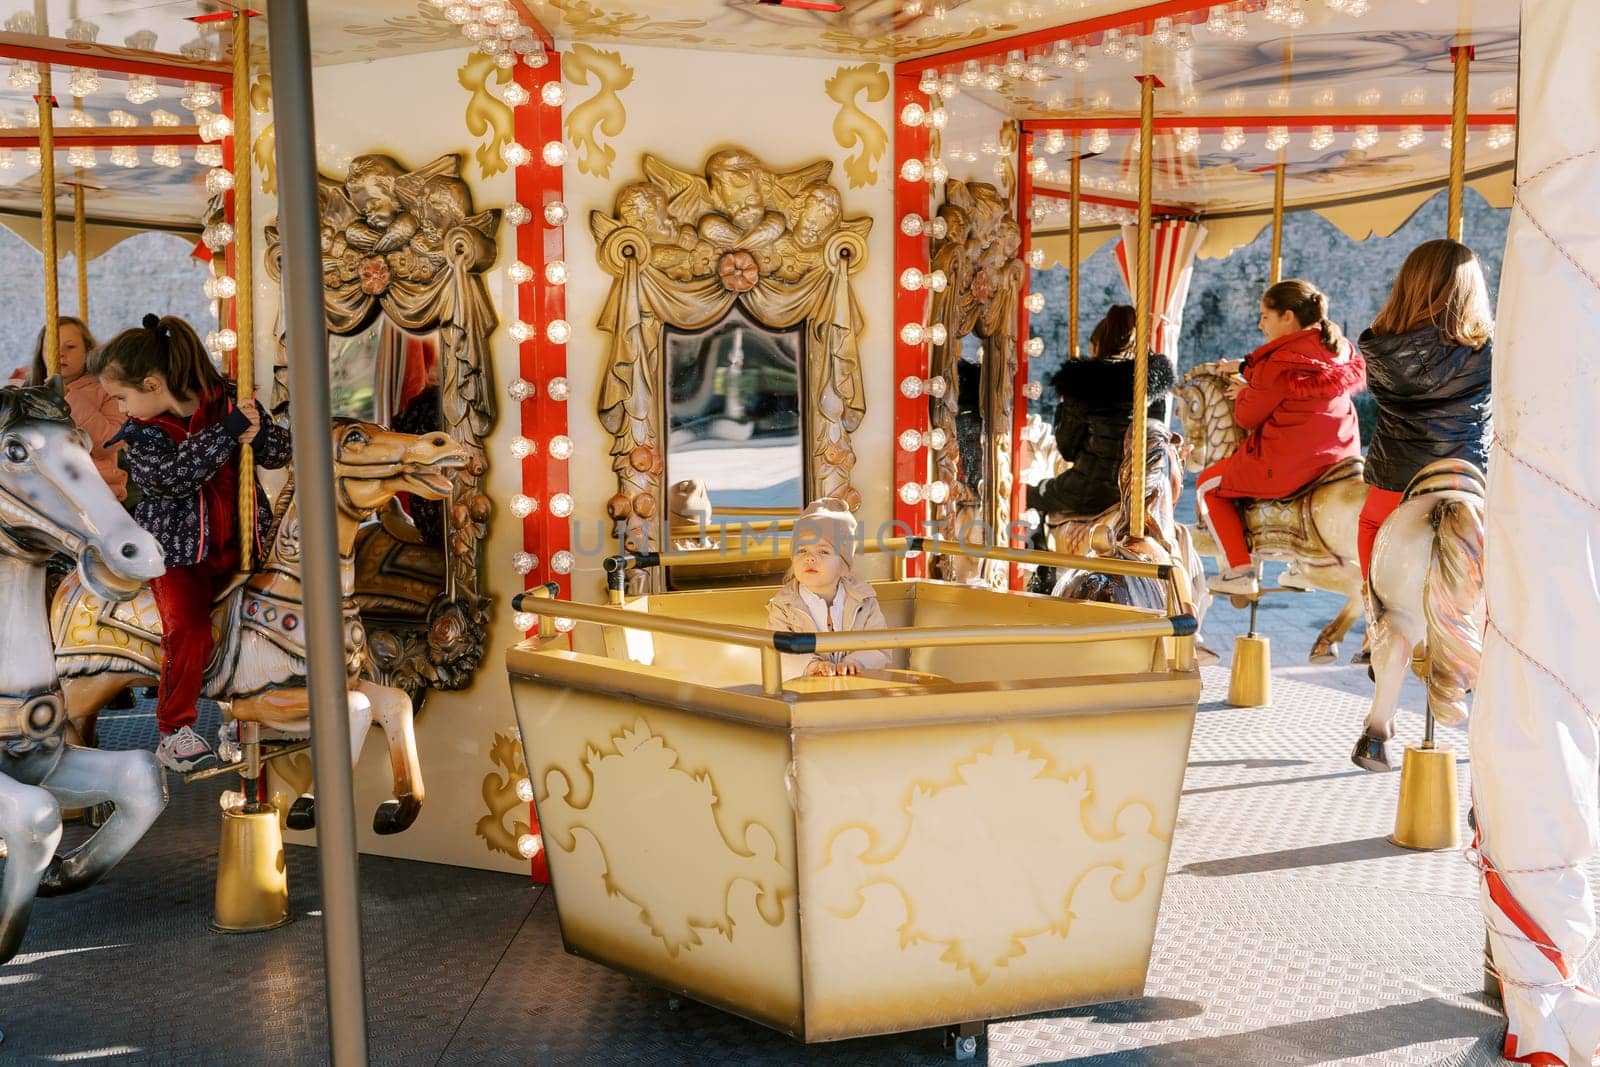 Little girl sits on a carousel seat next to children riding toy horses. High quality photo